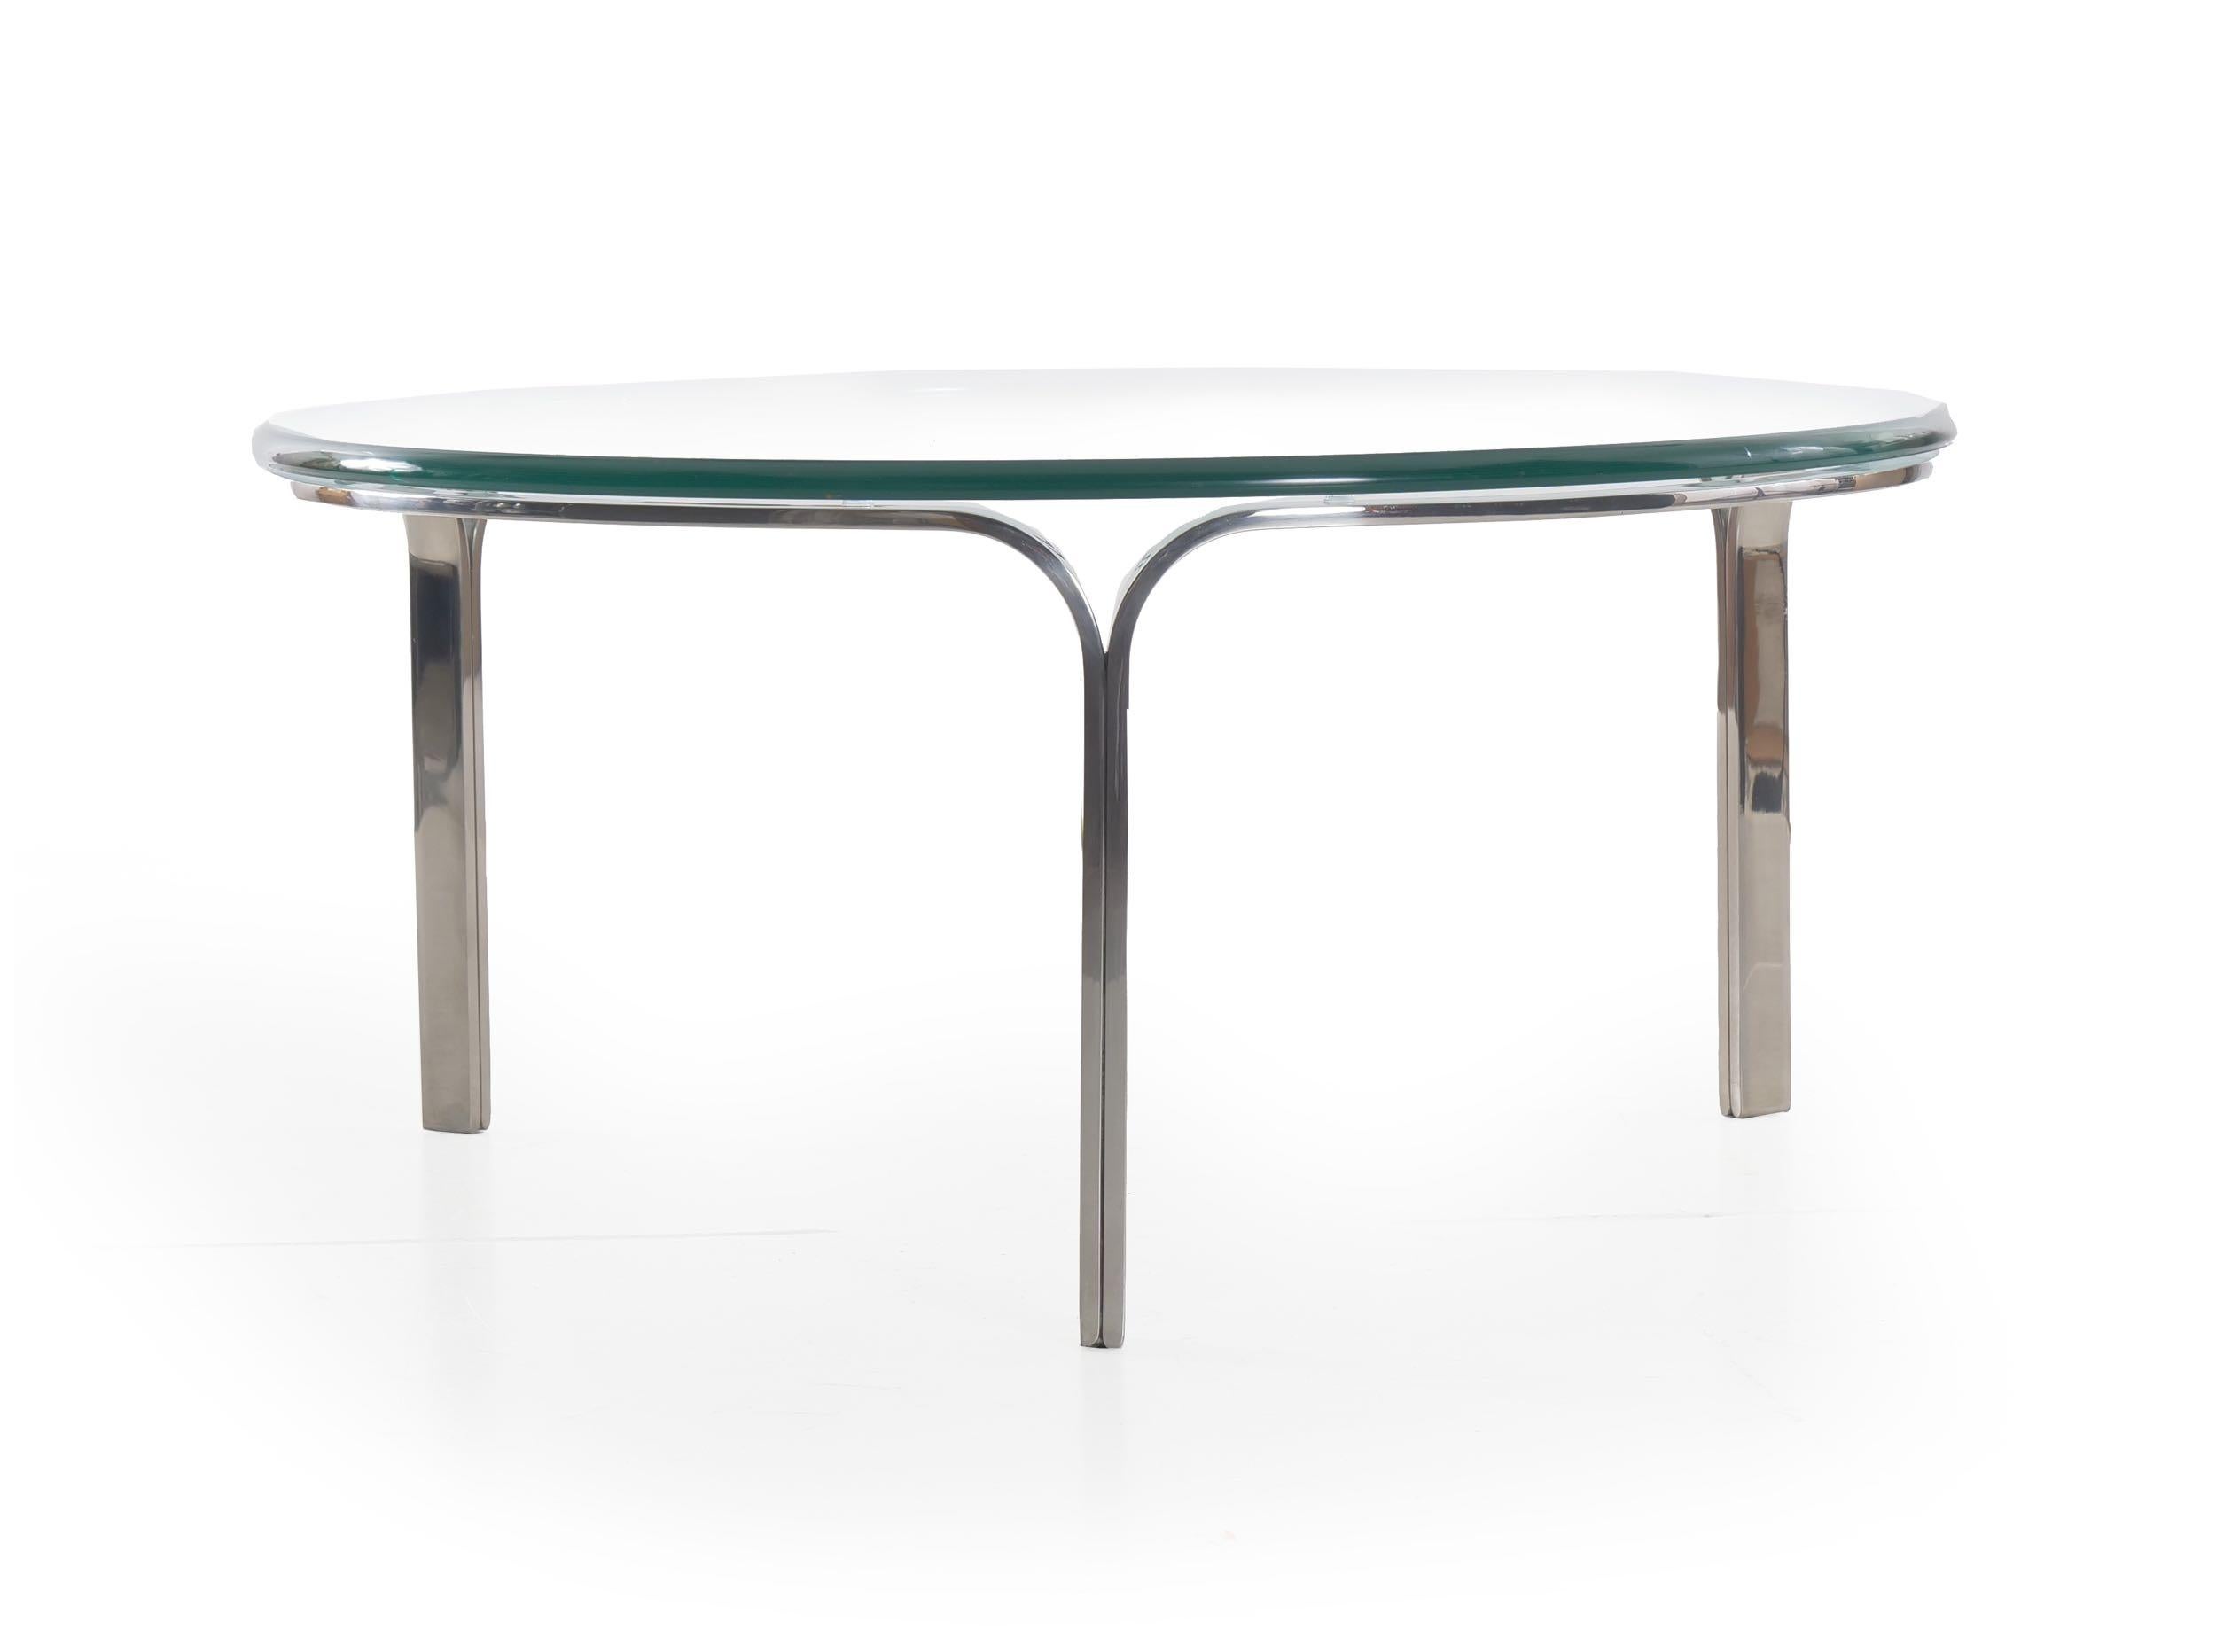 Bauhaus Steel and Glass Coffee Table by Nicos Zographos, circa 1960s